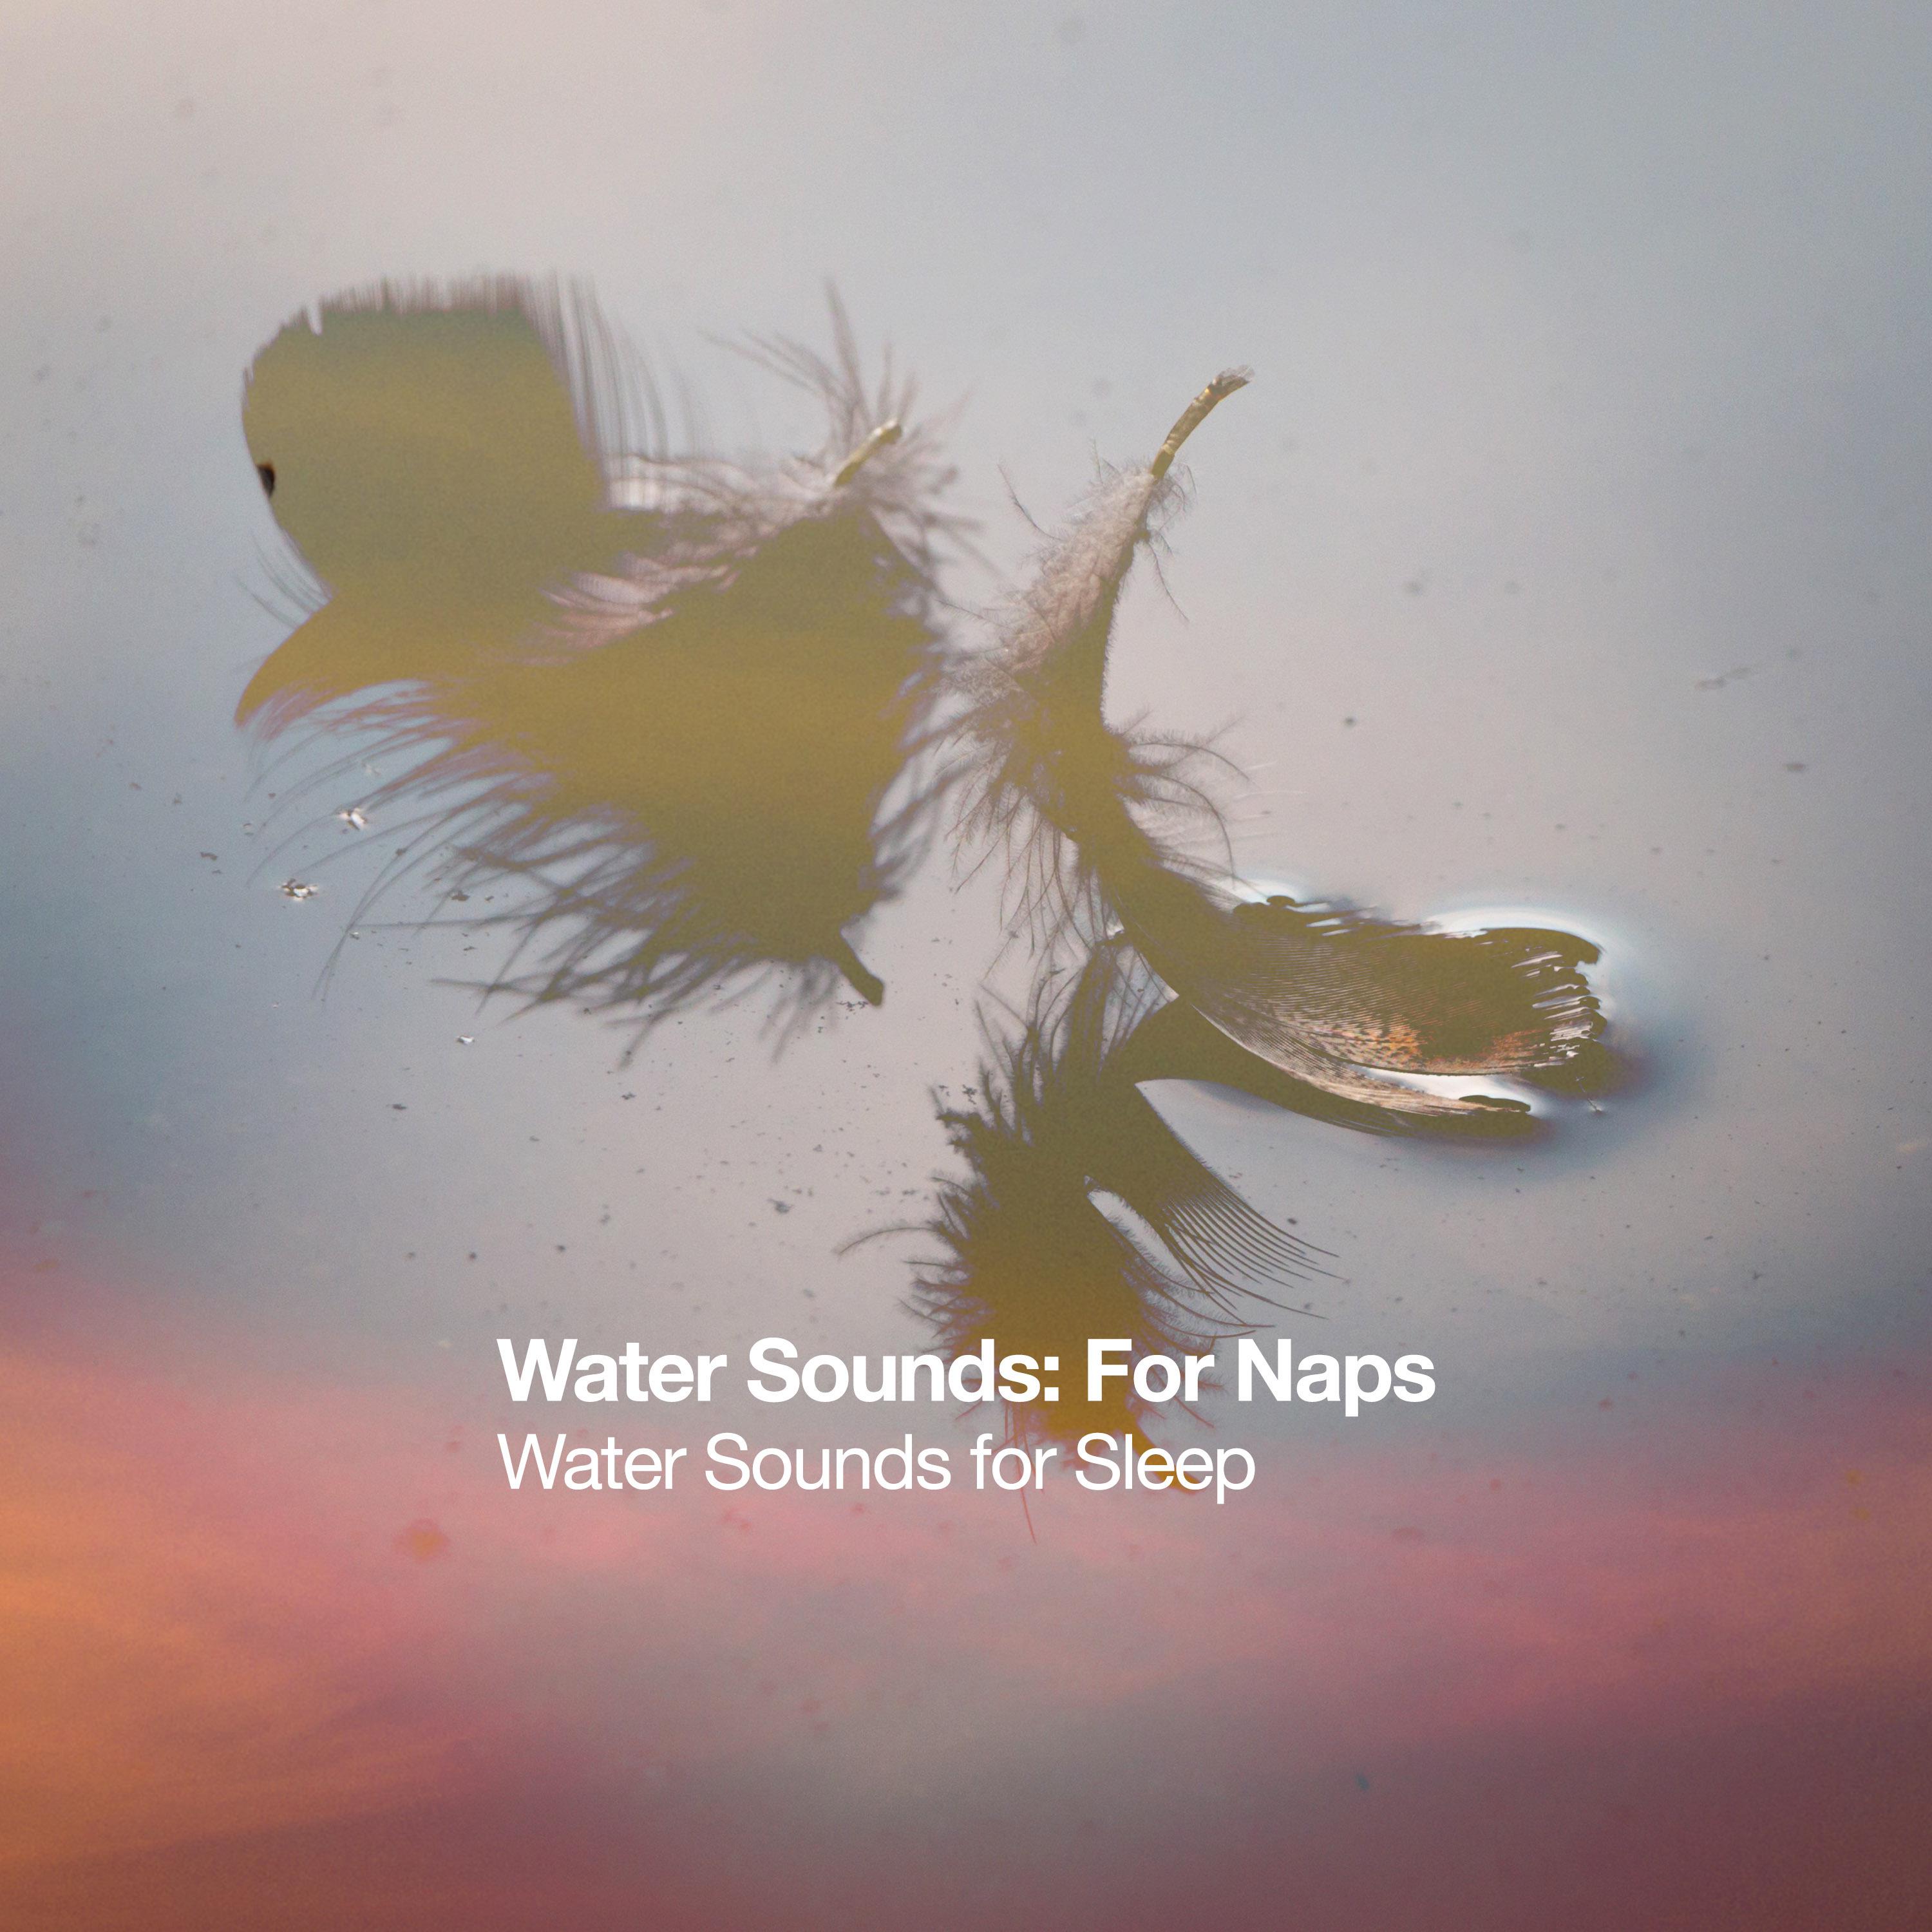 Water Sounds: For Naps